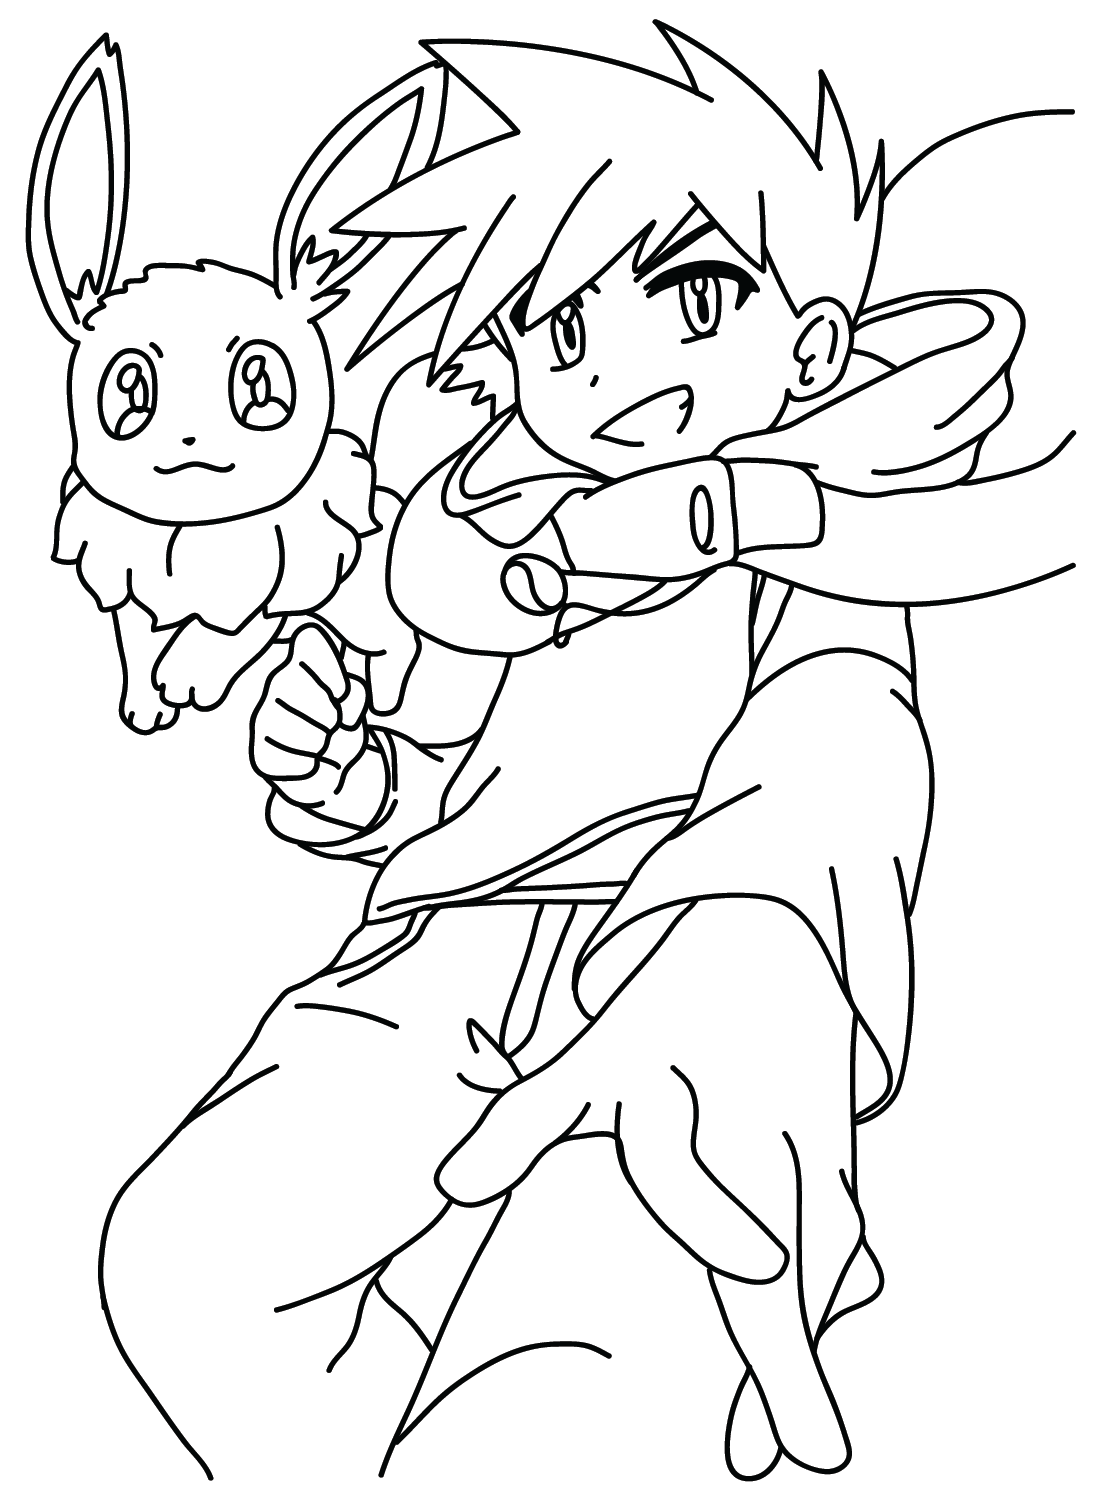 Eevee Pokemon and Gary Oak to Color from Eevee